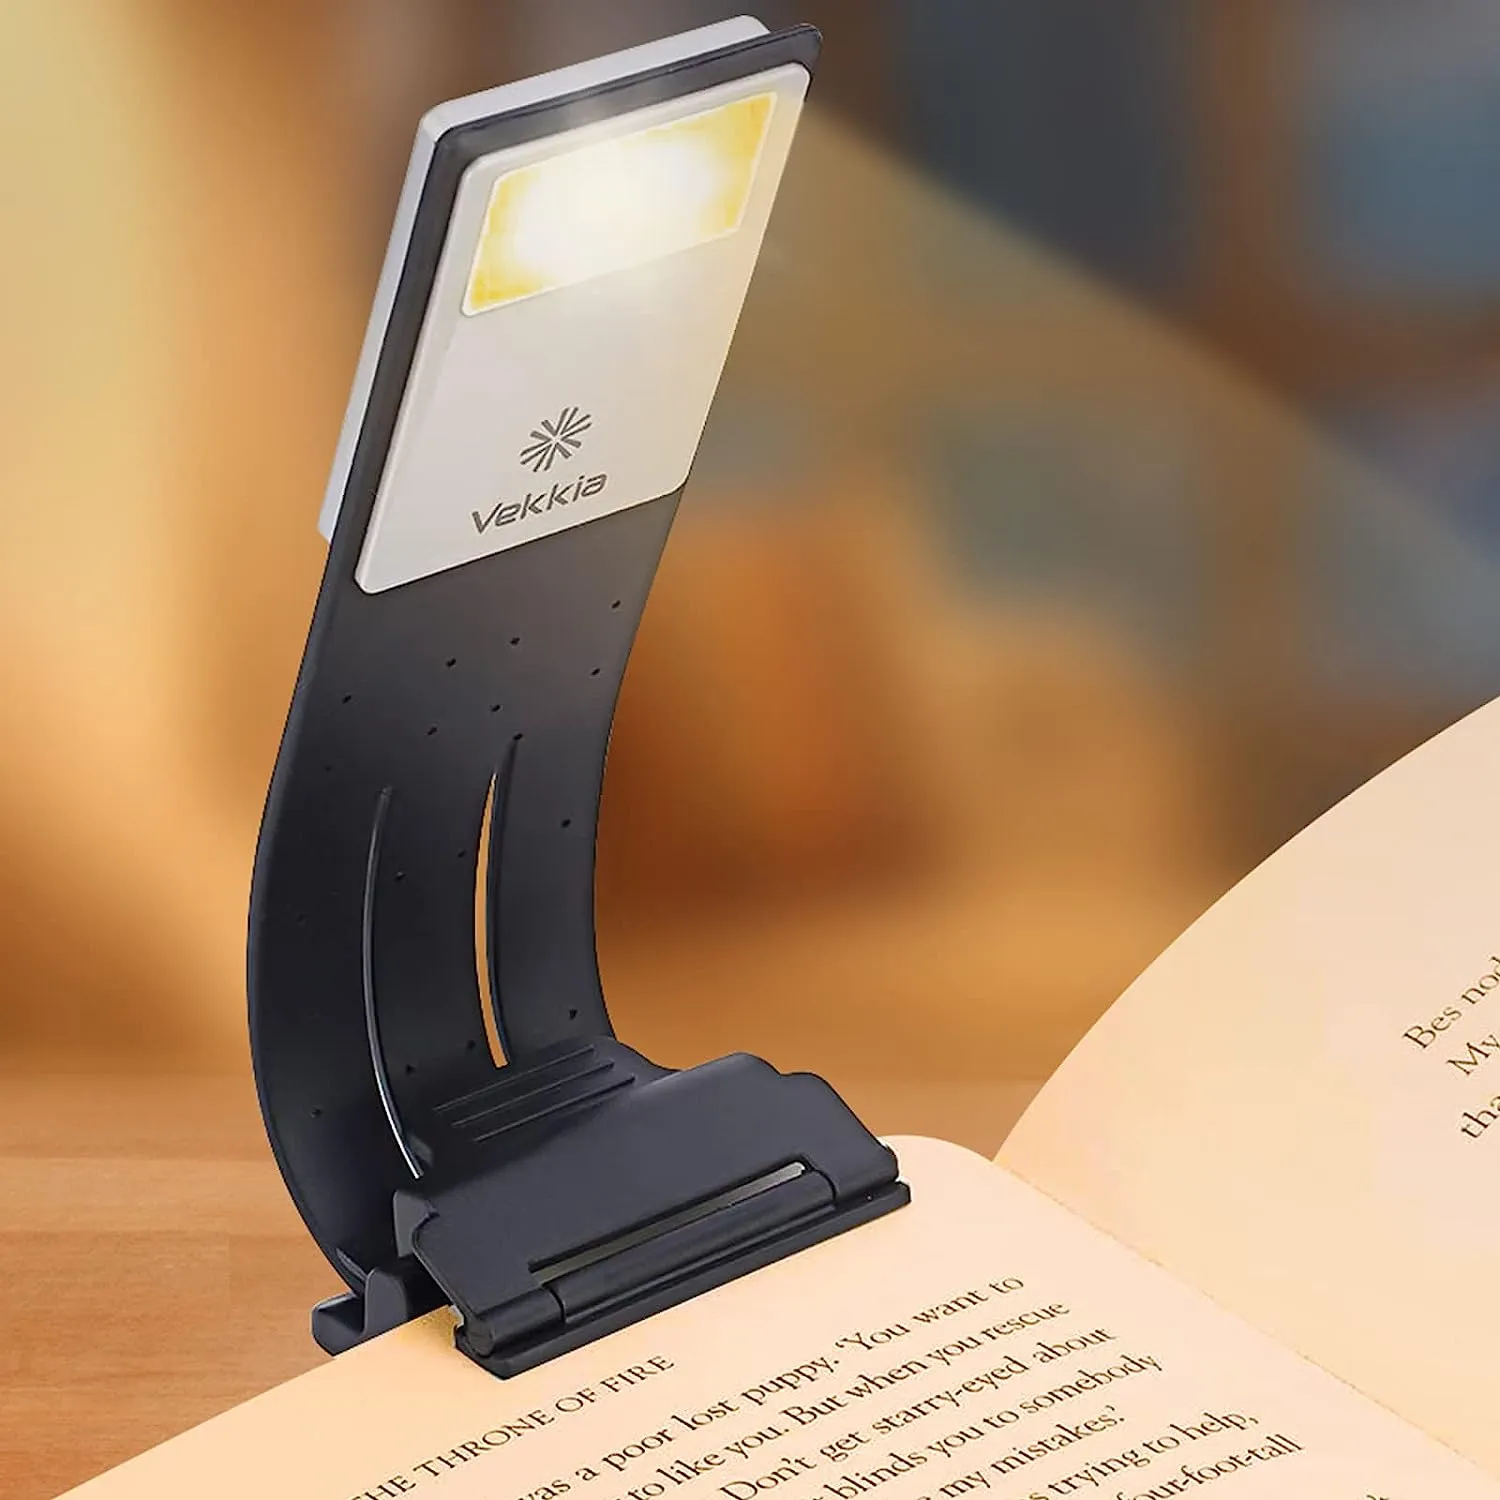 Vekkia Bookmark Book Light, Clip on Reading Lights for Books in Bed, Infinite Brightness Levels, Soft Light Easy for Eyes, Built-in USB Cable Easy Charge....